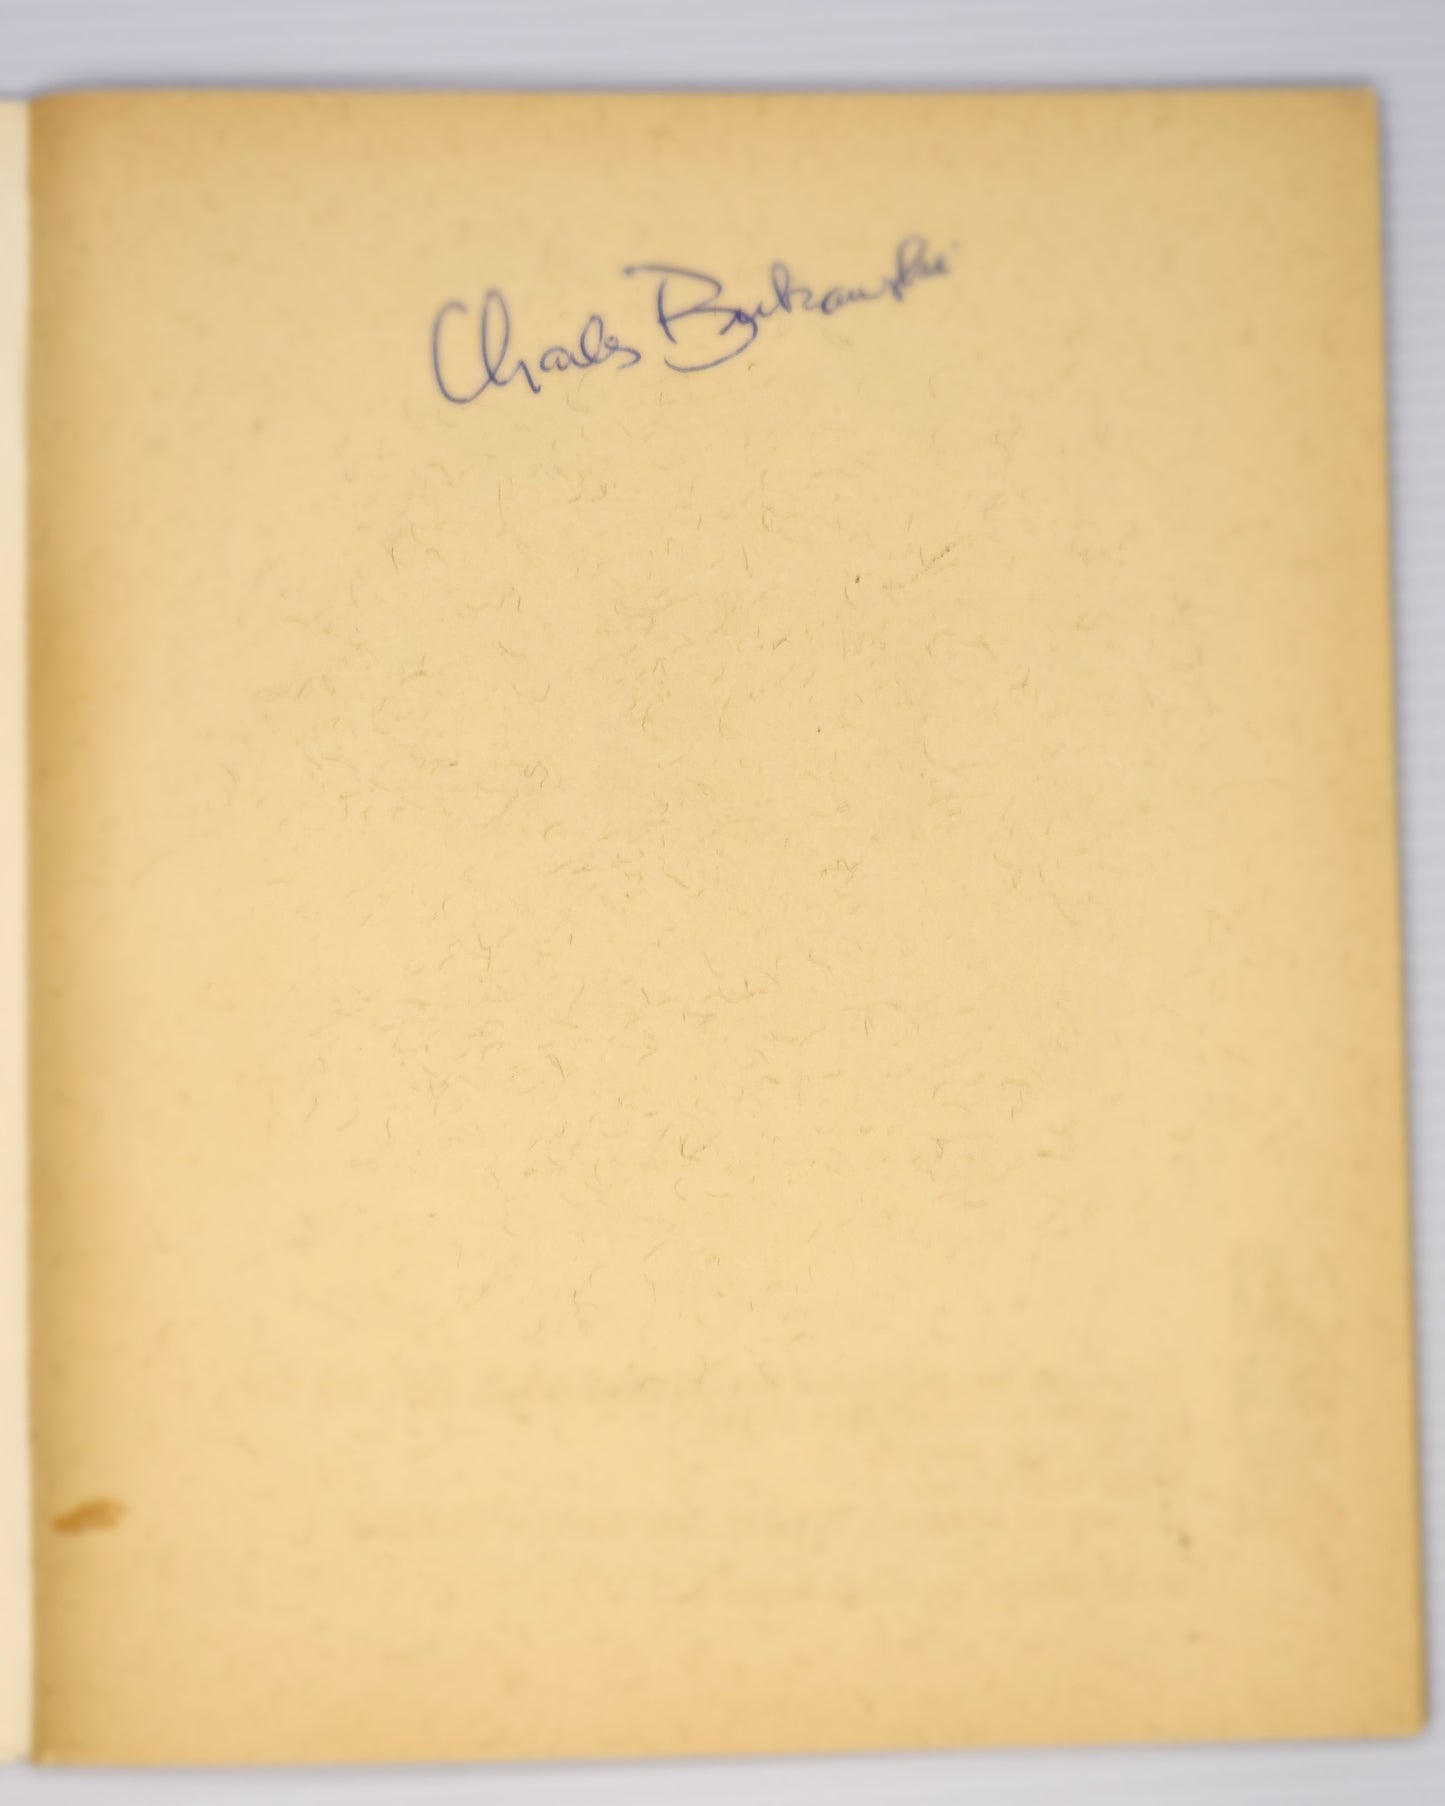 6 Poets Signed By Charles Bukowski: Six Drawings of Six Poets (First Edition)